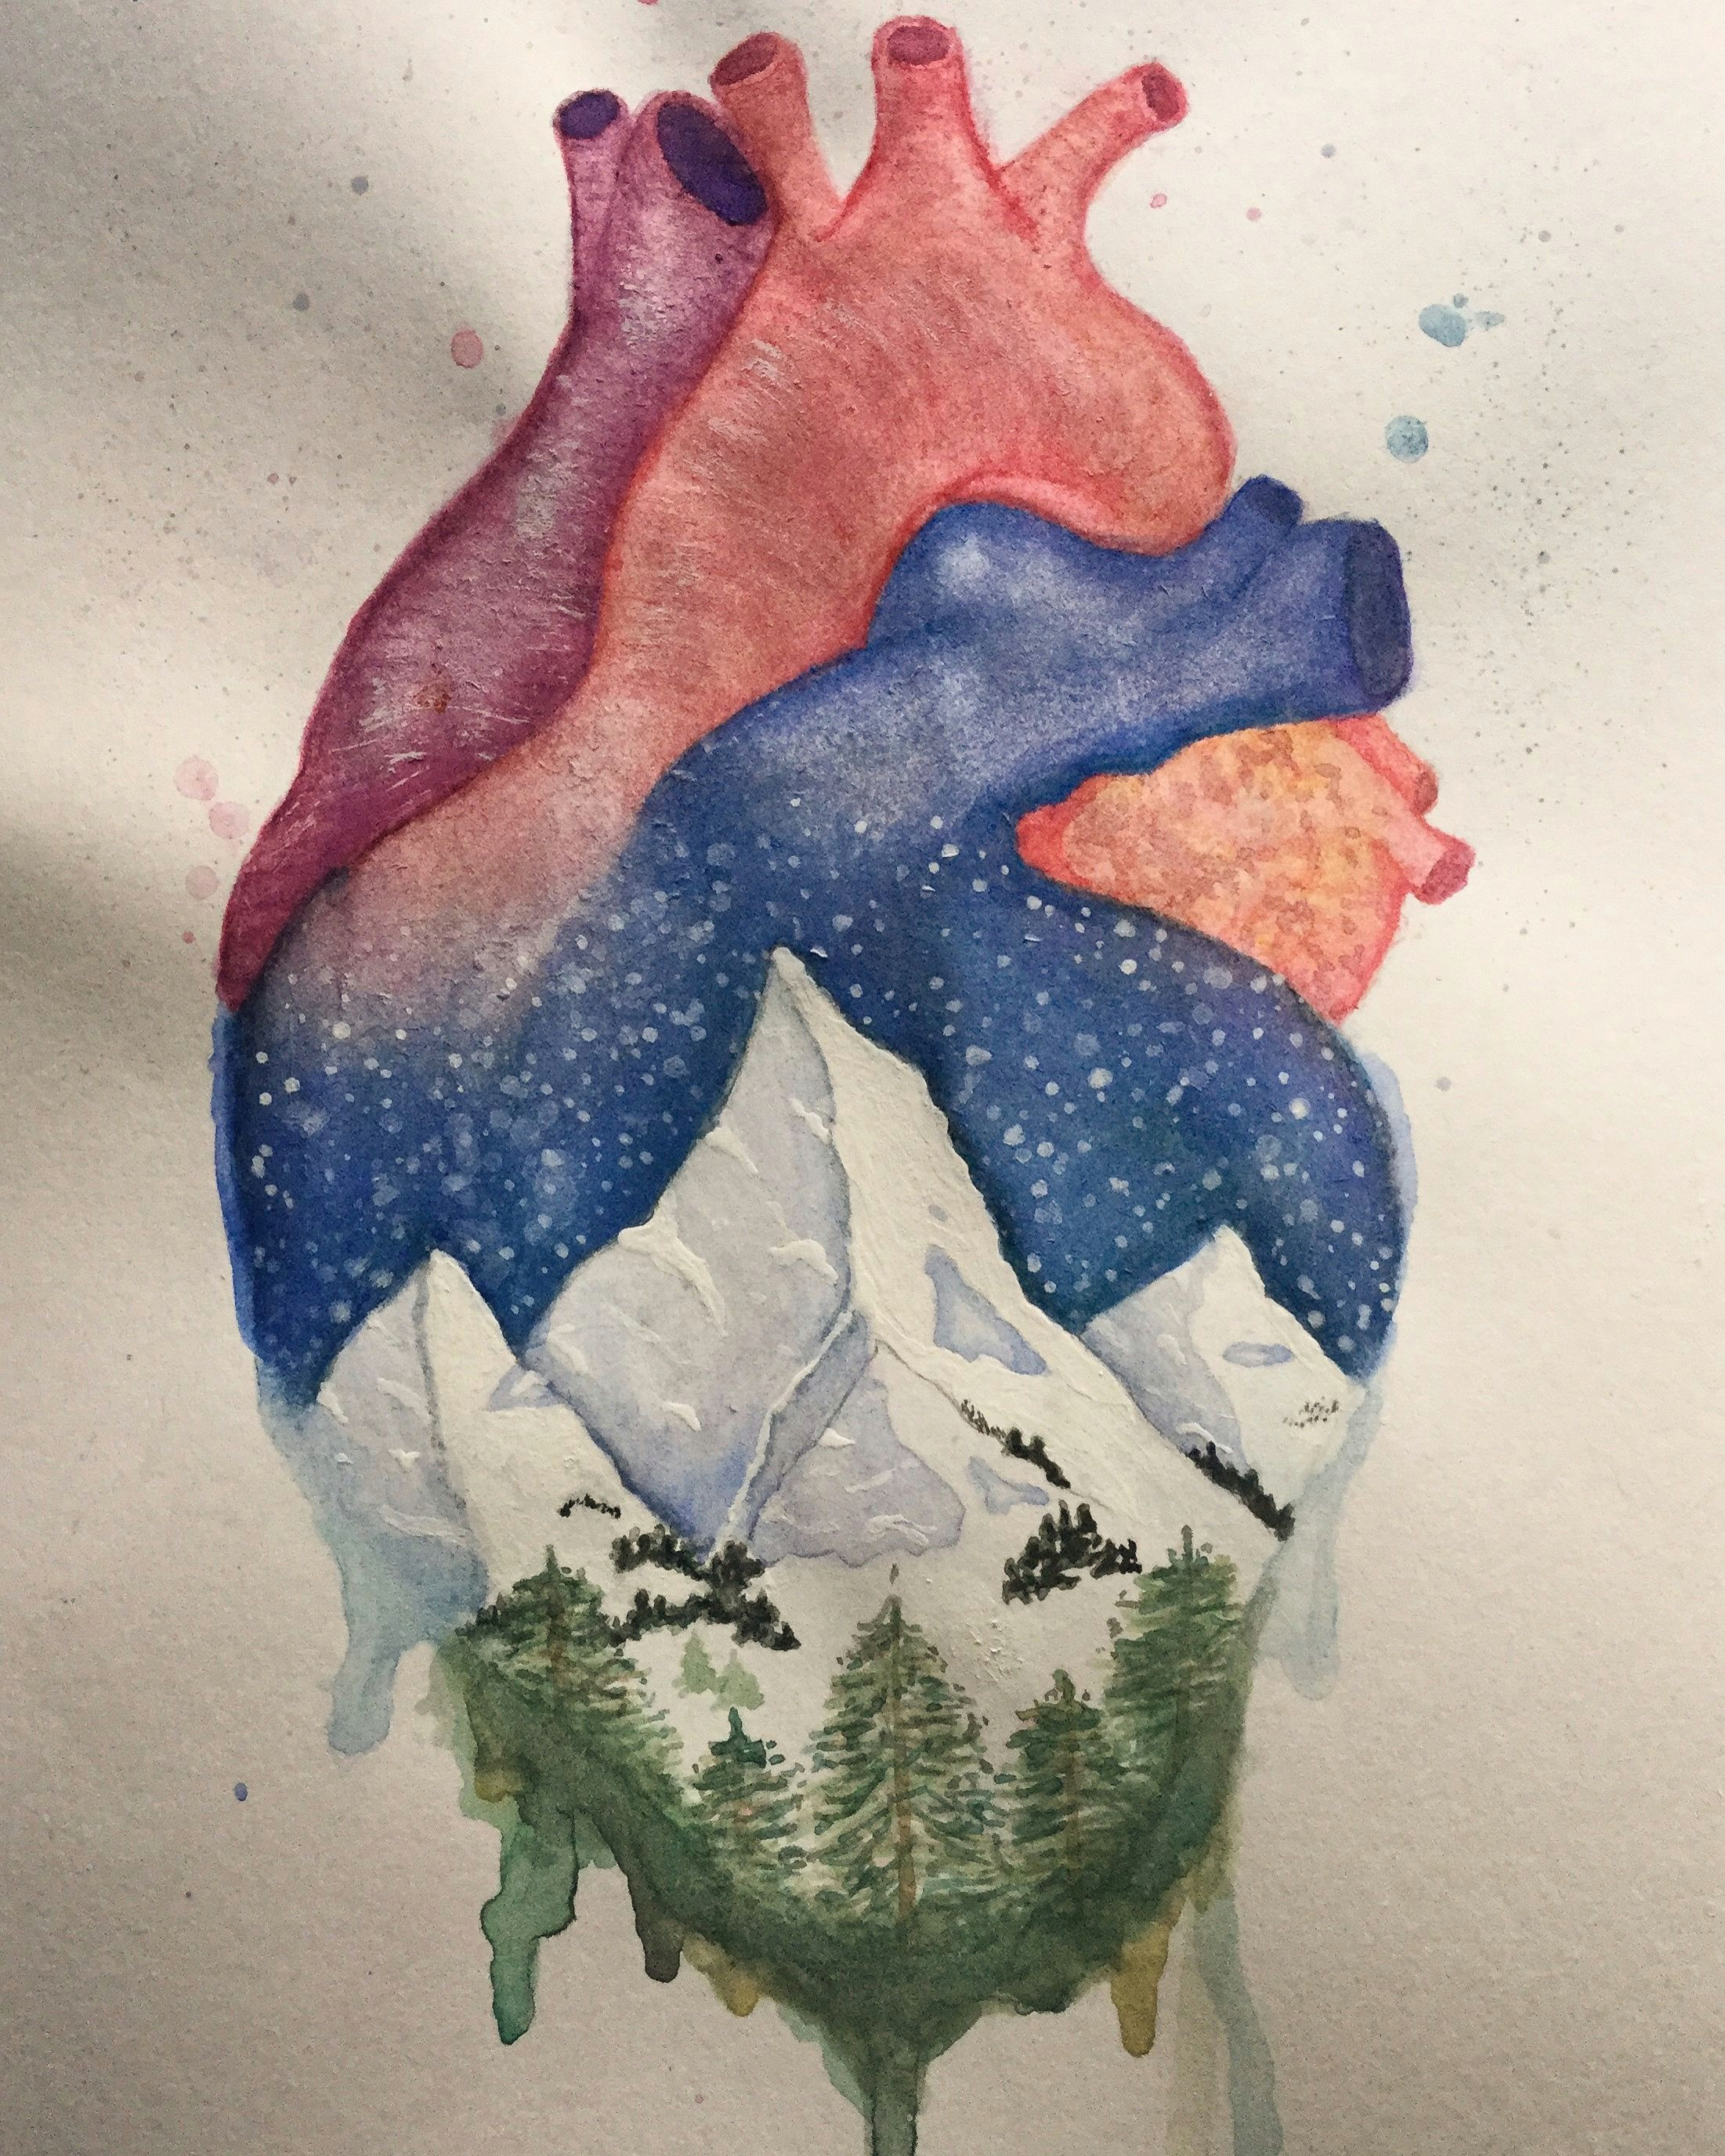 Drawing Of An Anatomical Heart Anatomical Heart and Winter Mountain Landscape Watercolor Painting